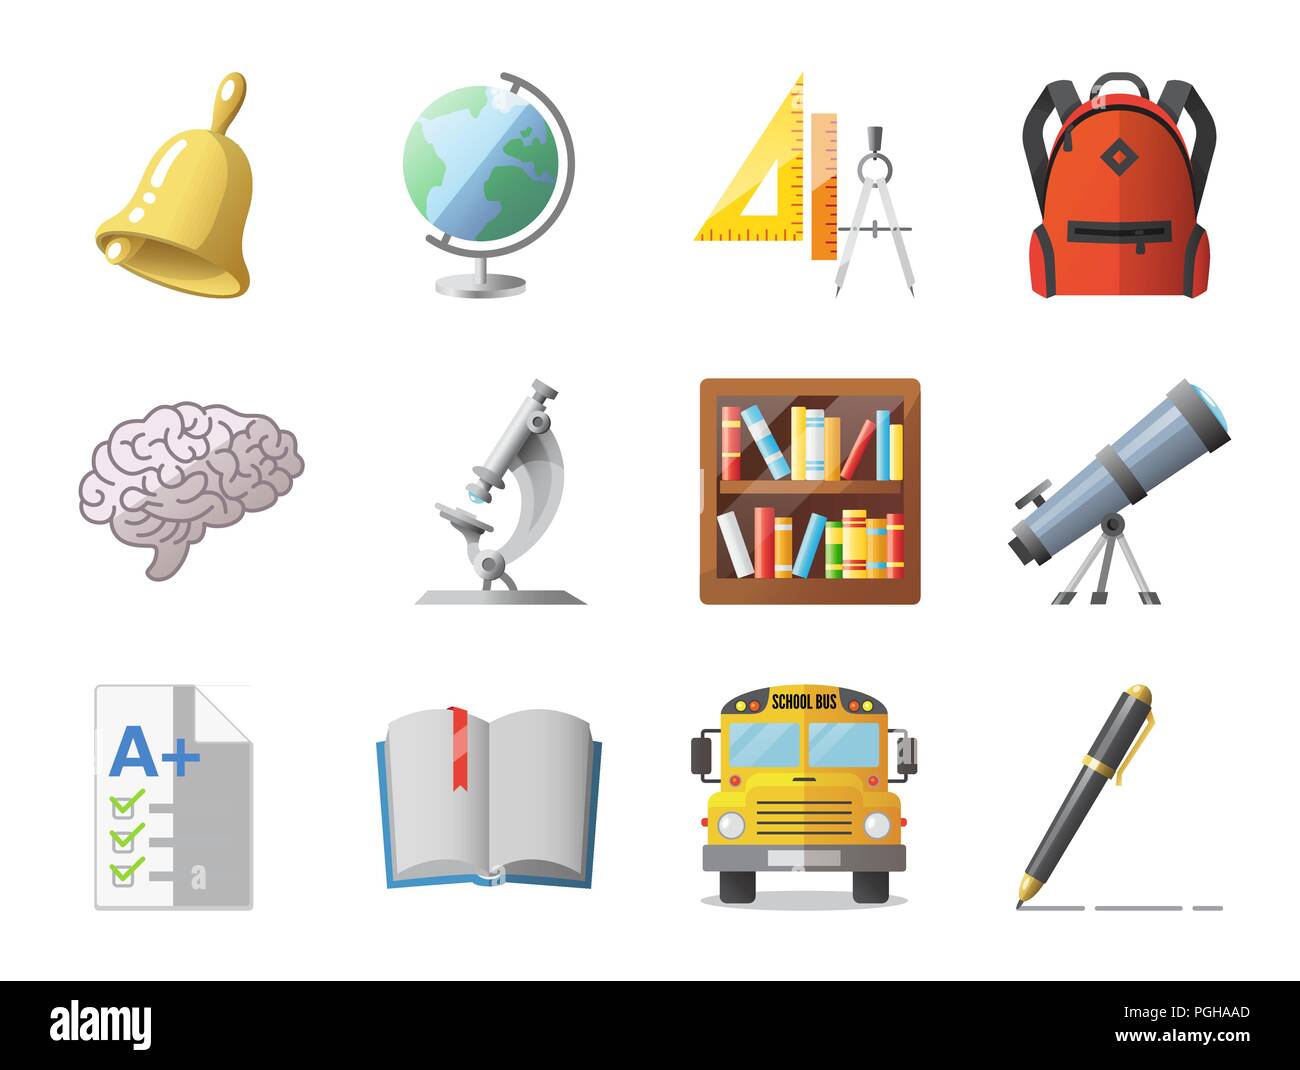 Set of school icons, shool supplies and transport Stock Vector